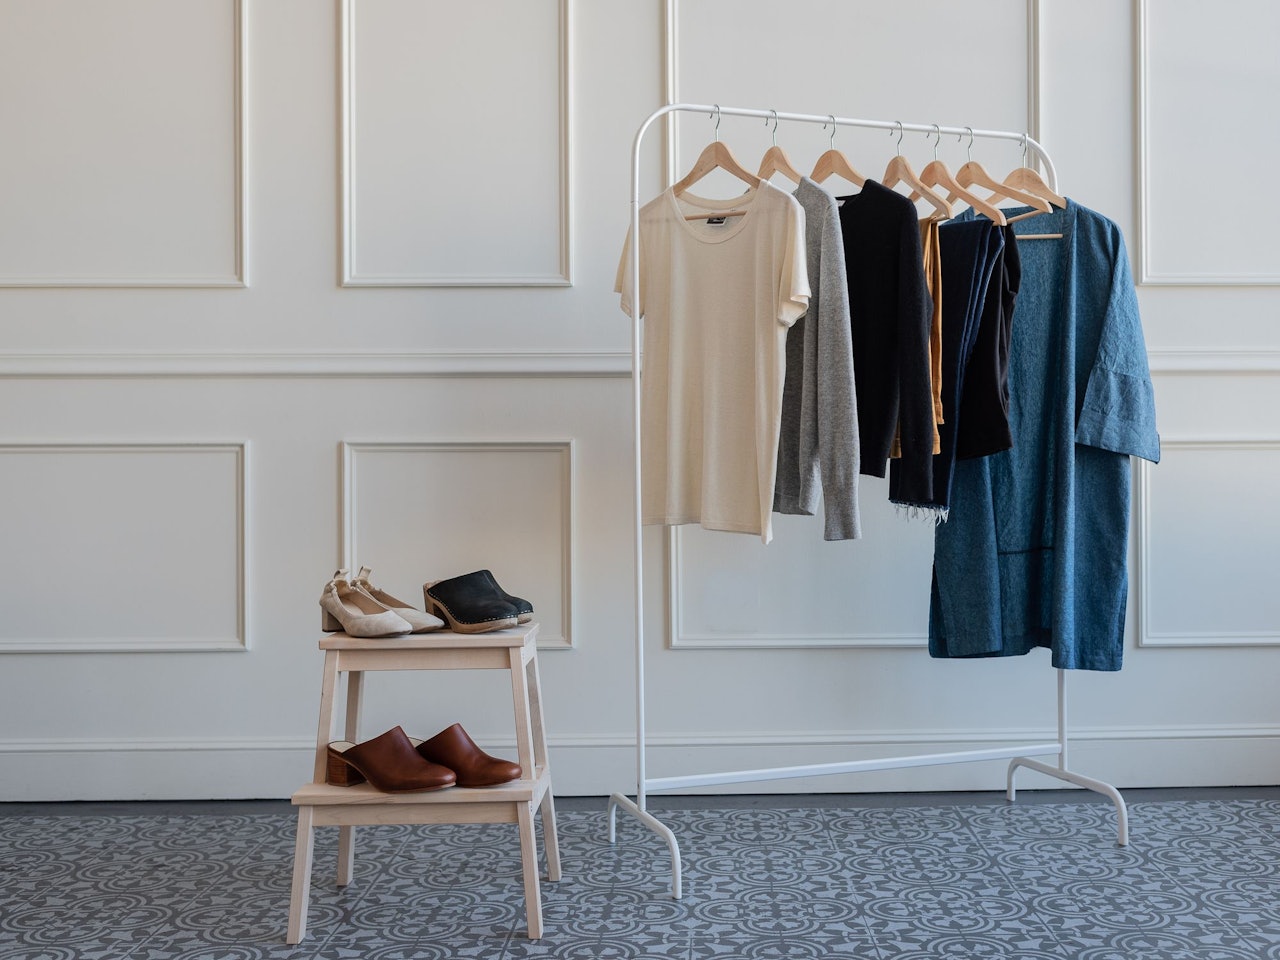 2018 Fall 10x10 Challenge and capsule Closet by Conscious by Chloé